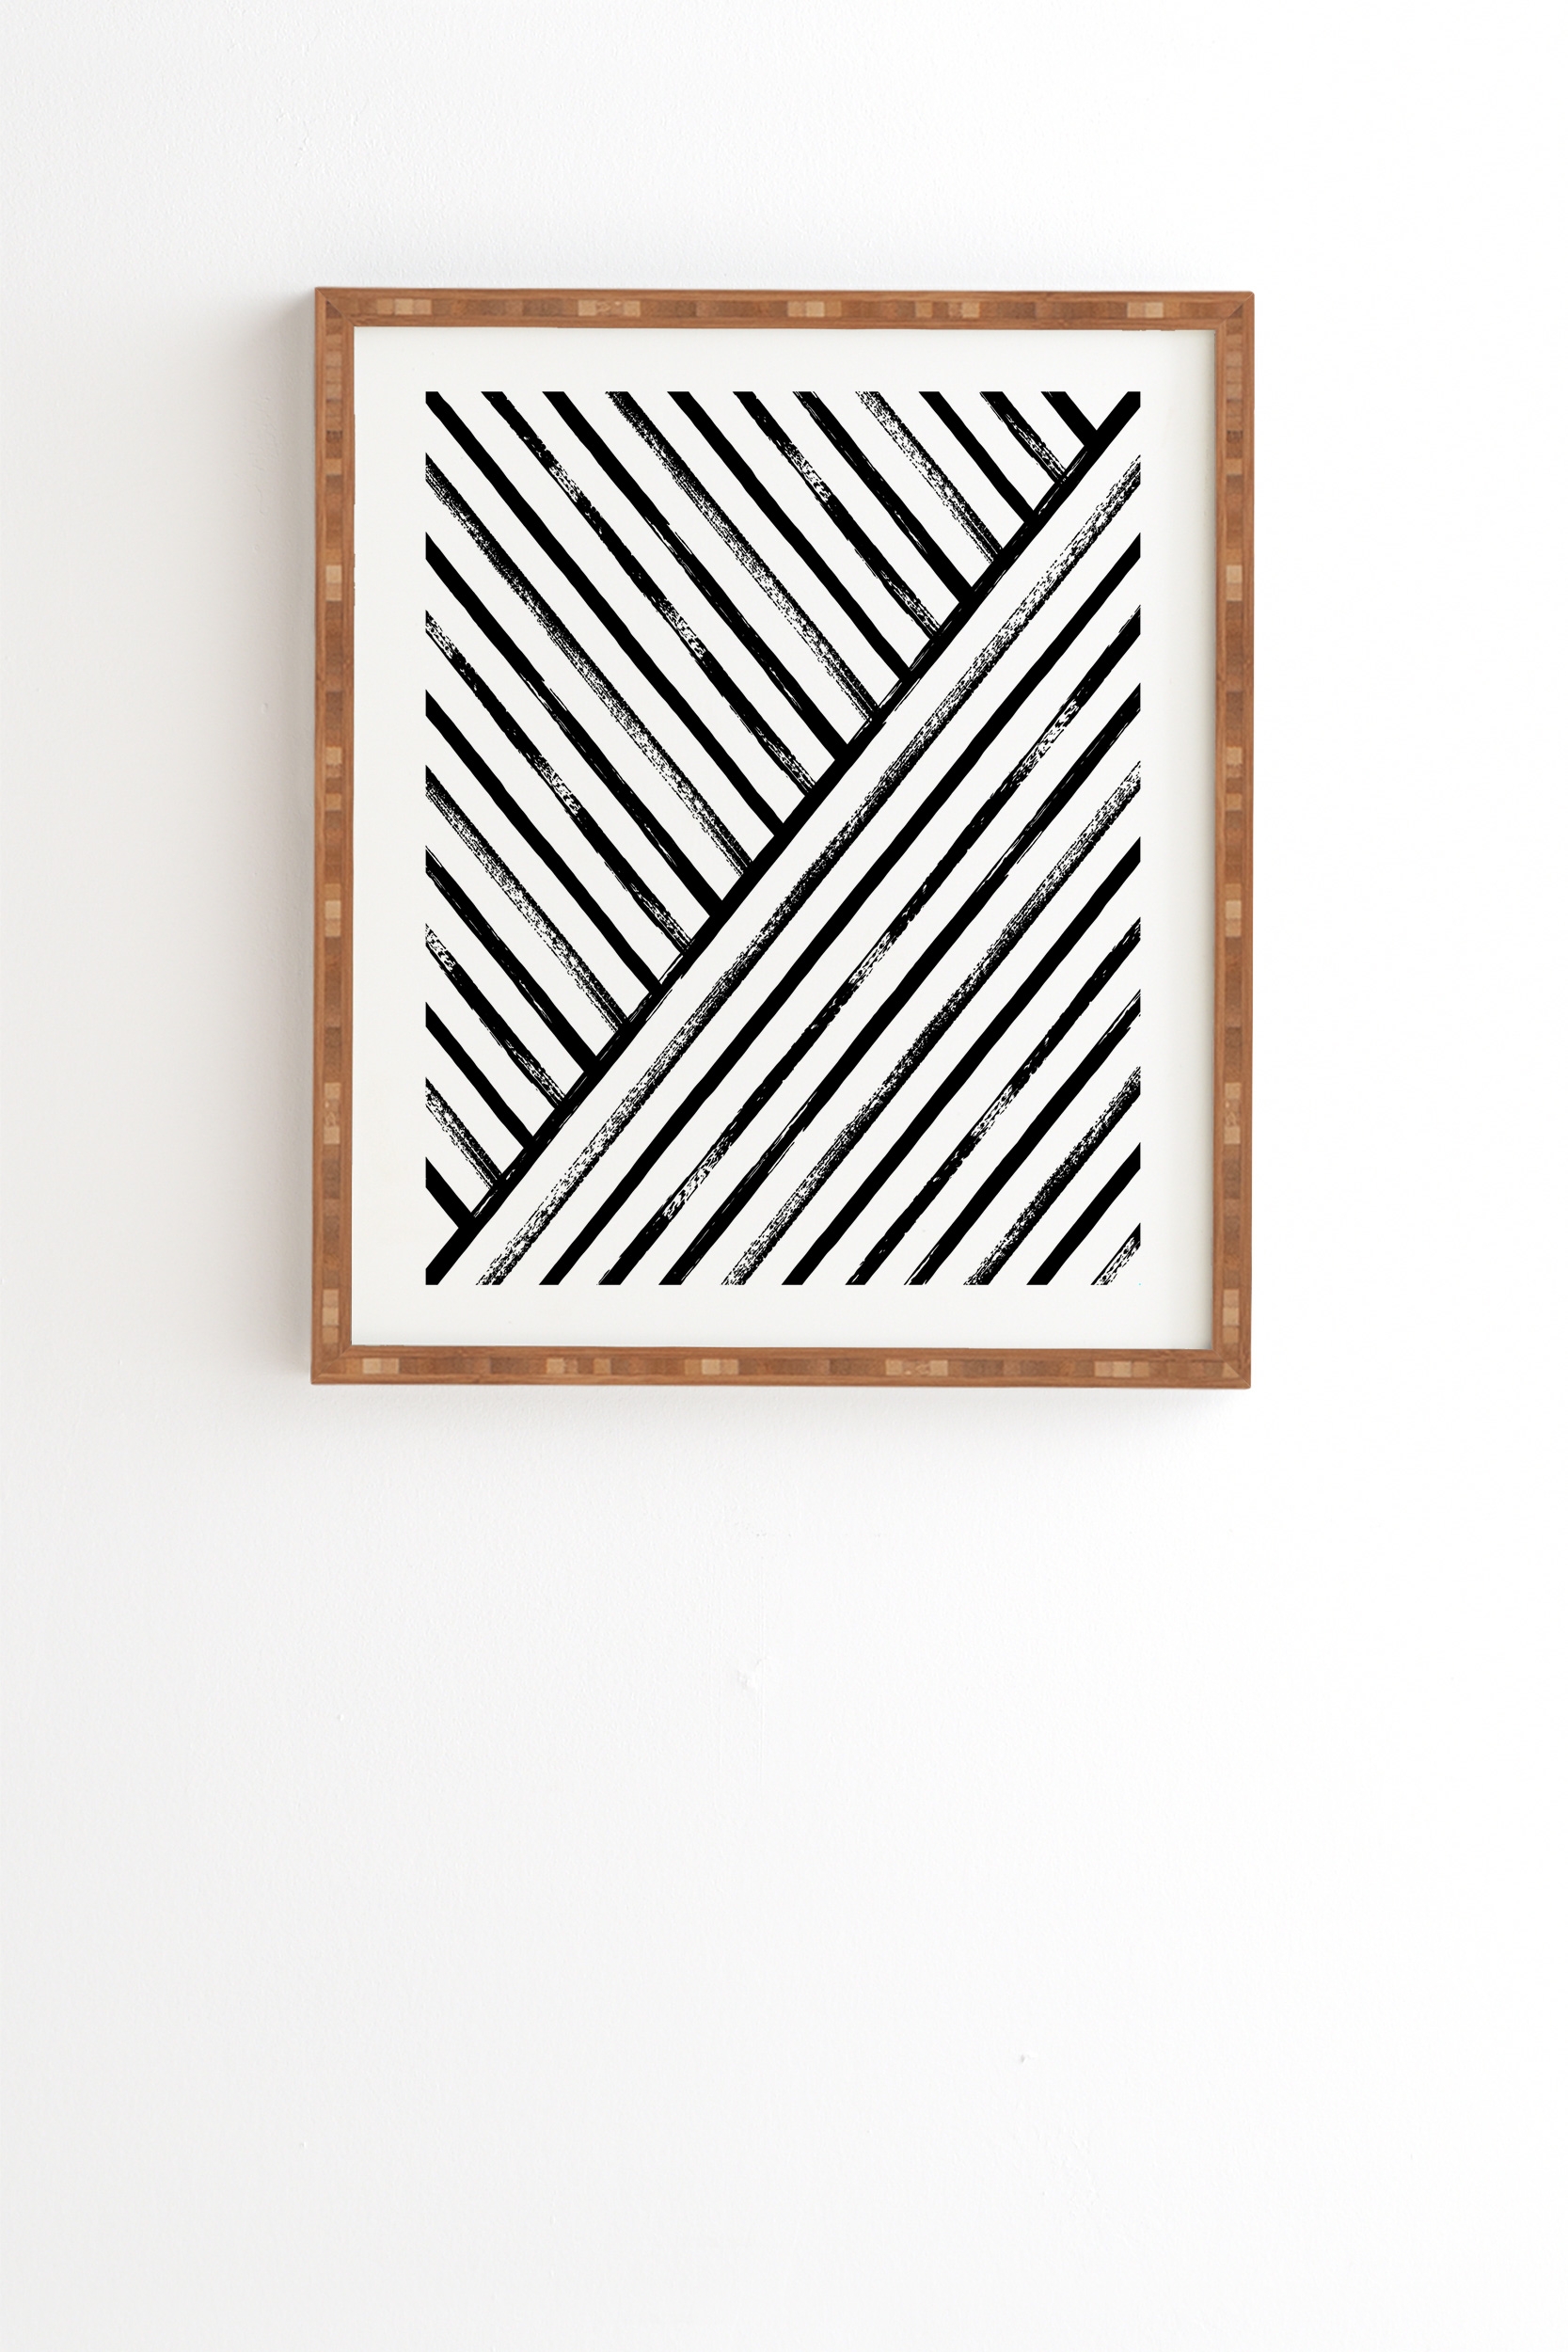 Geometric Stripe Pattern by Kelly Haines - Framed Wall Art Bamboo 30" x 30" - Image 0